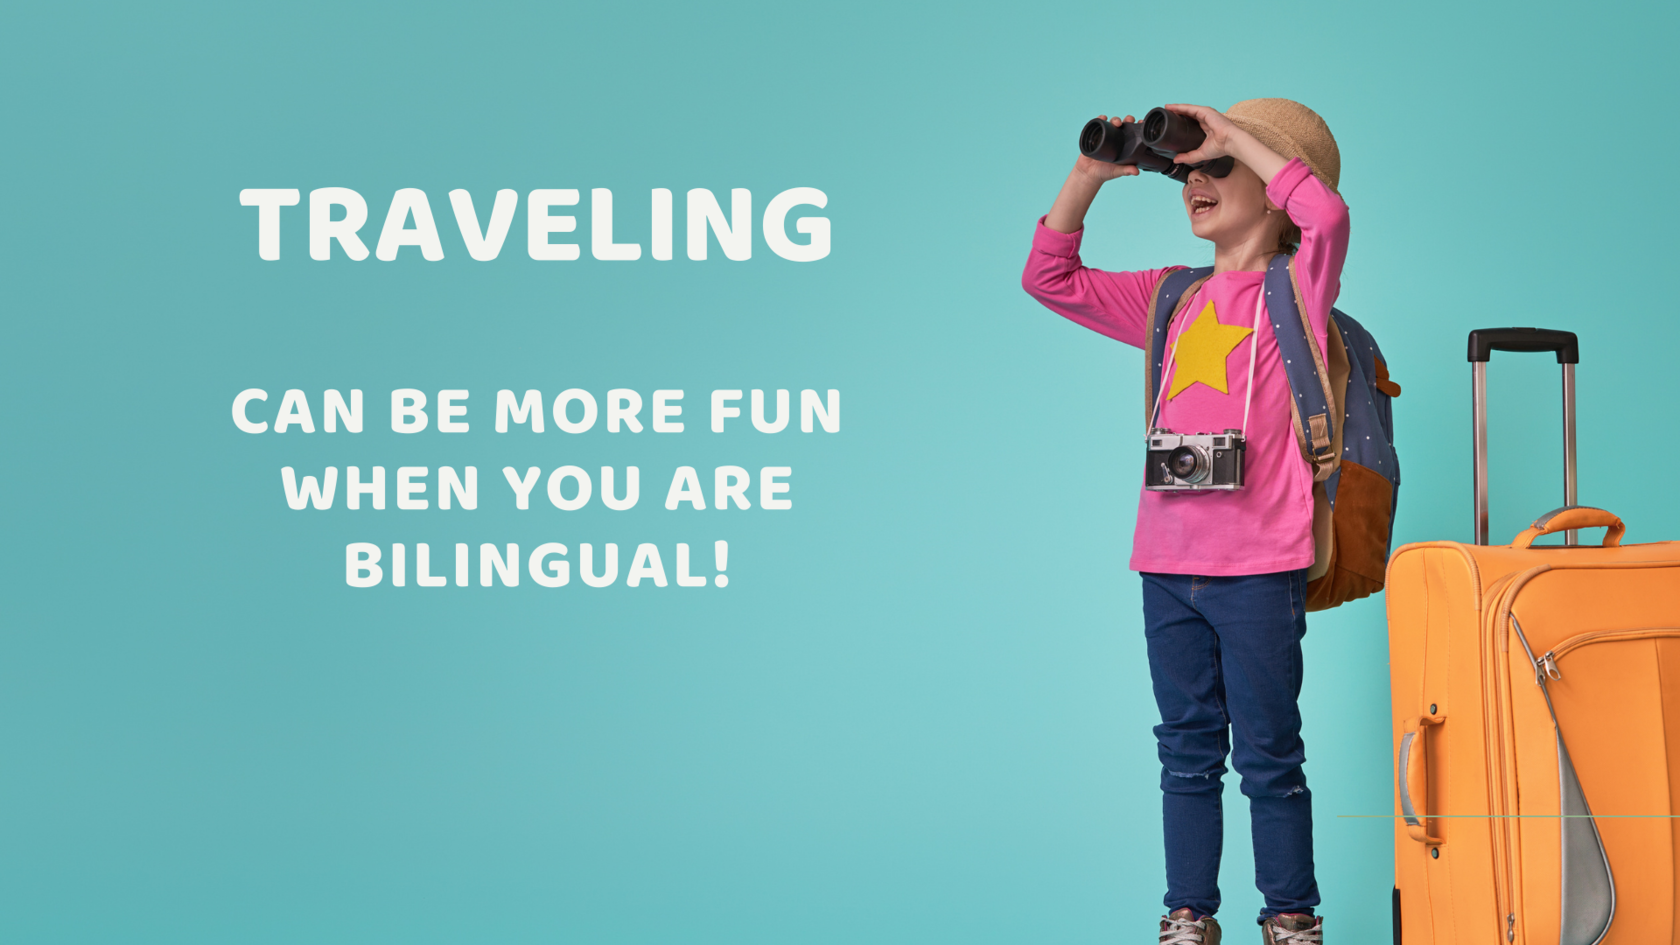 Traveling is fun for bilingual kids